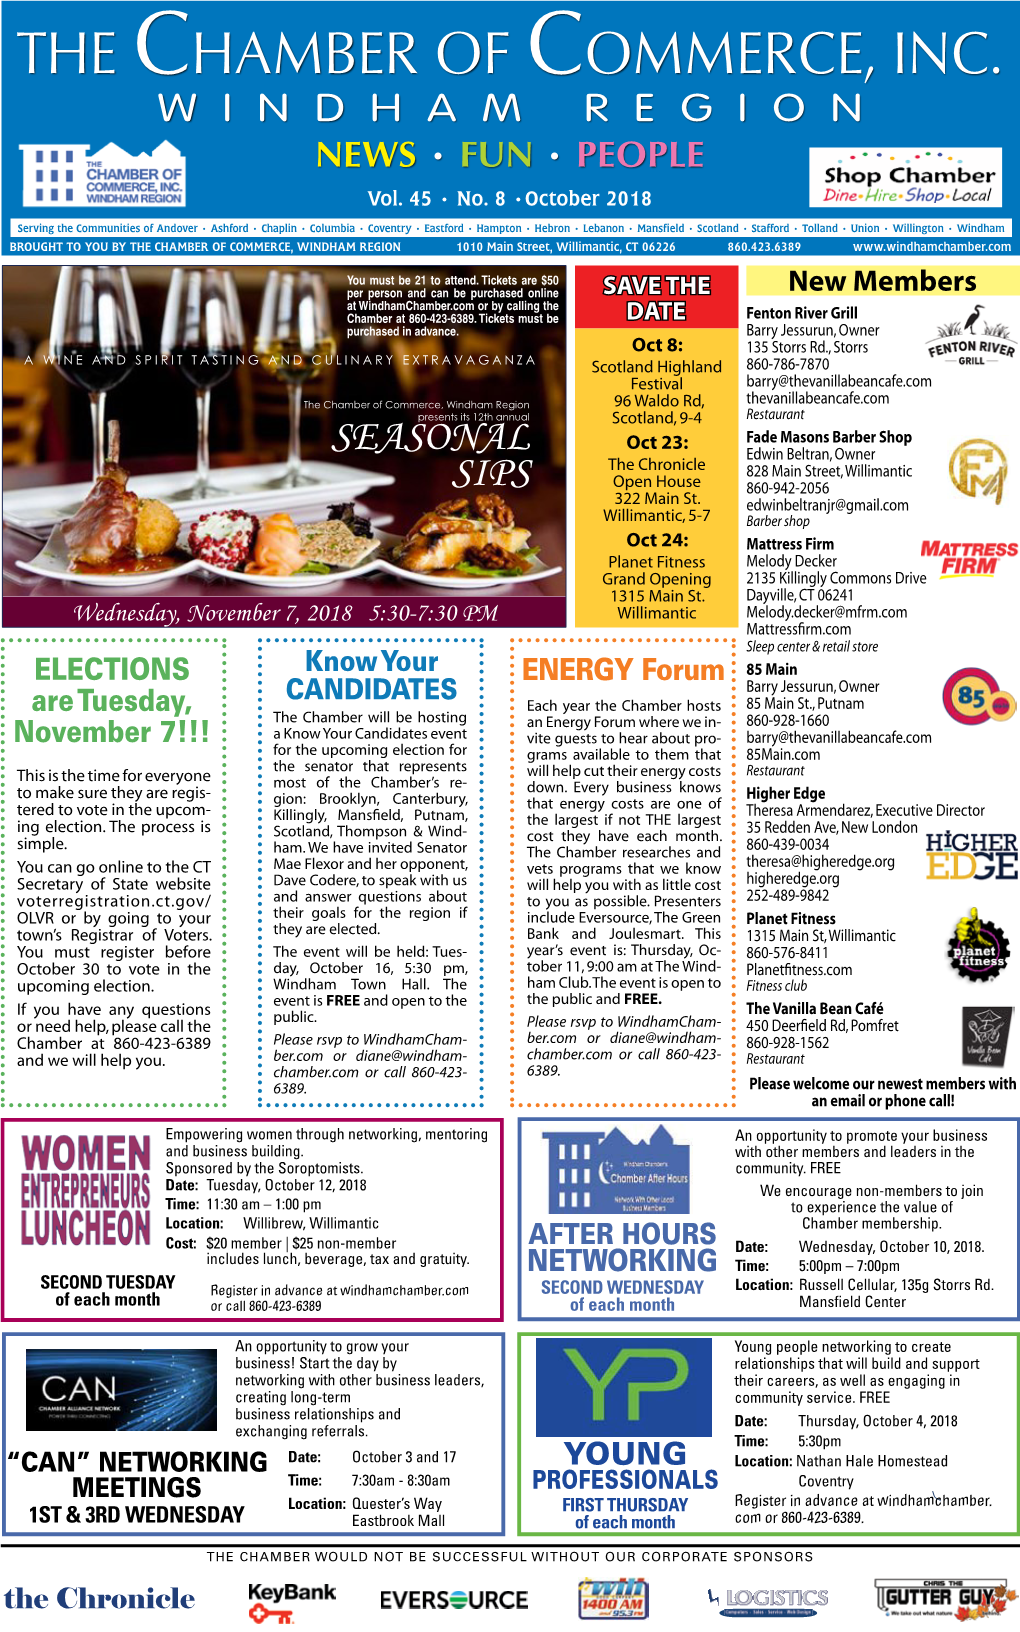 The Chamber of Commerce, Inc. Windham Region News • Fun • People Vol